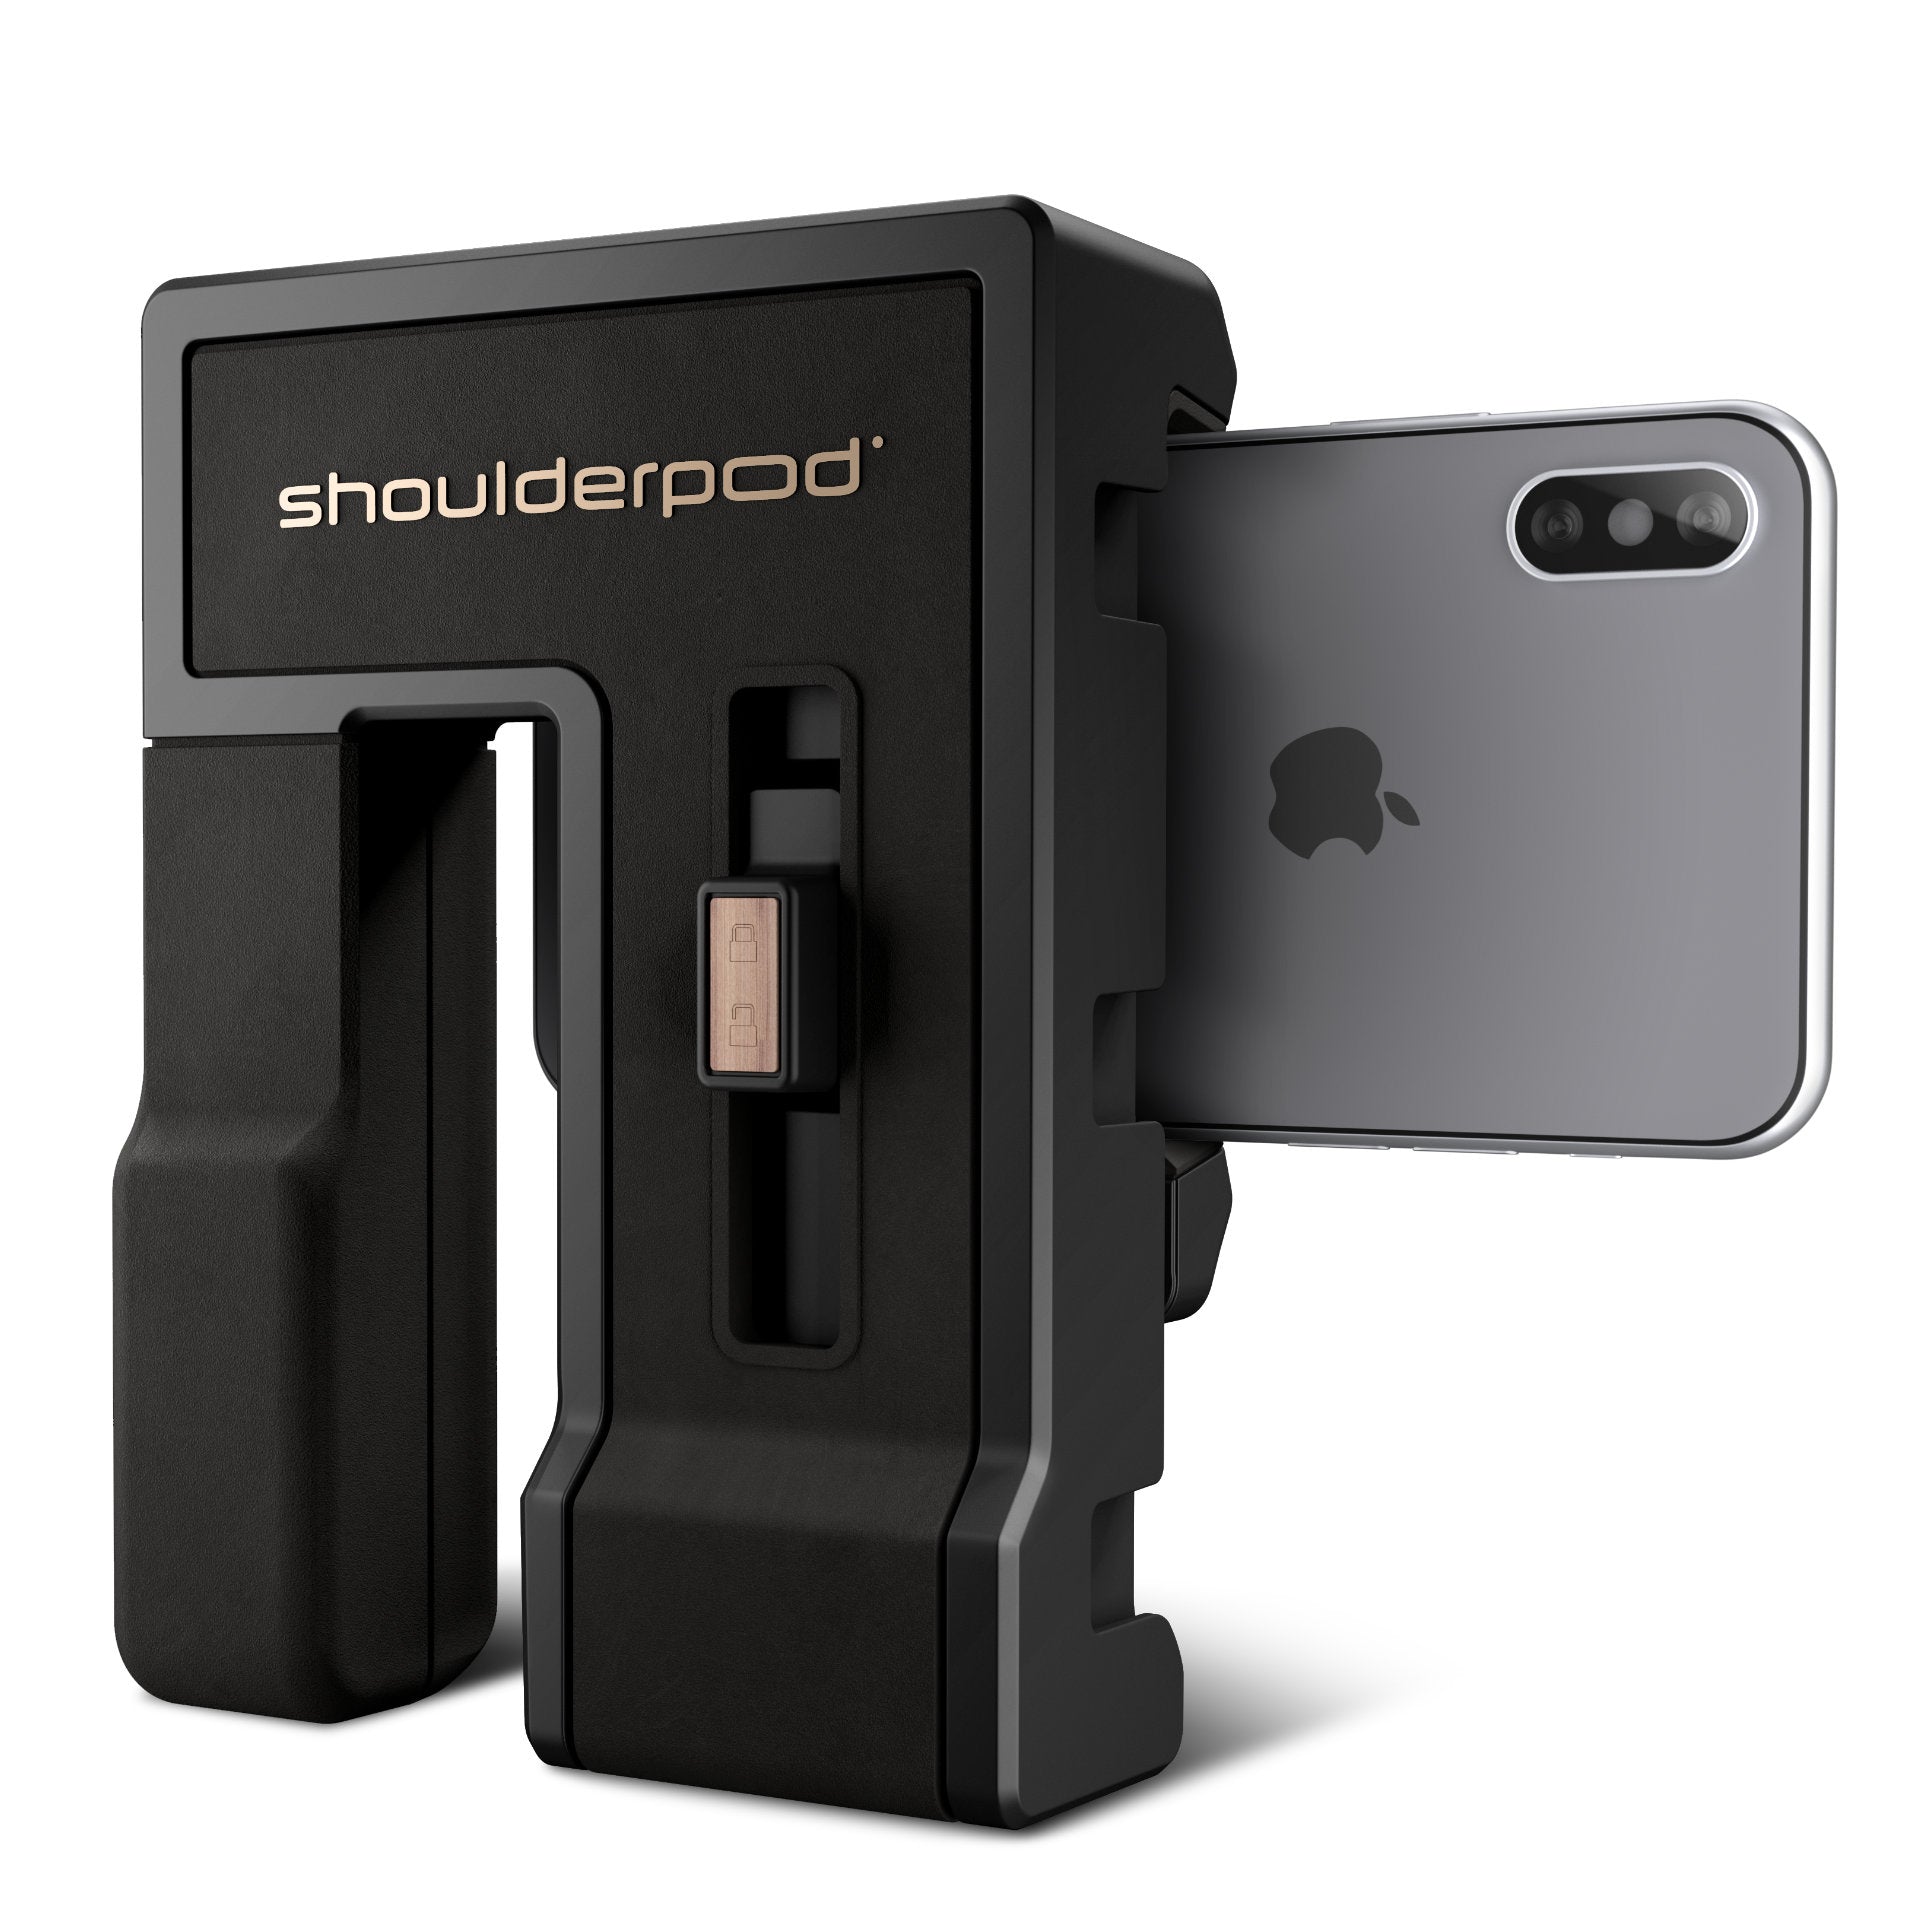 Shoulderpod G2 - The Bold One - The Usual